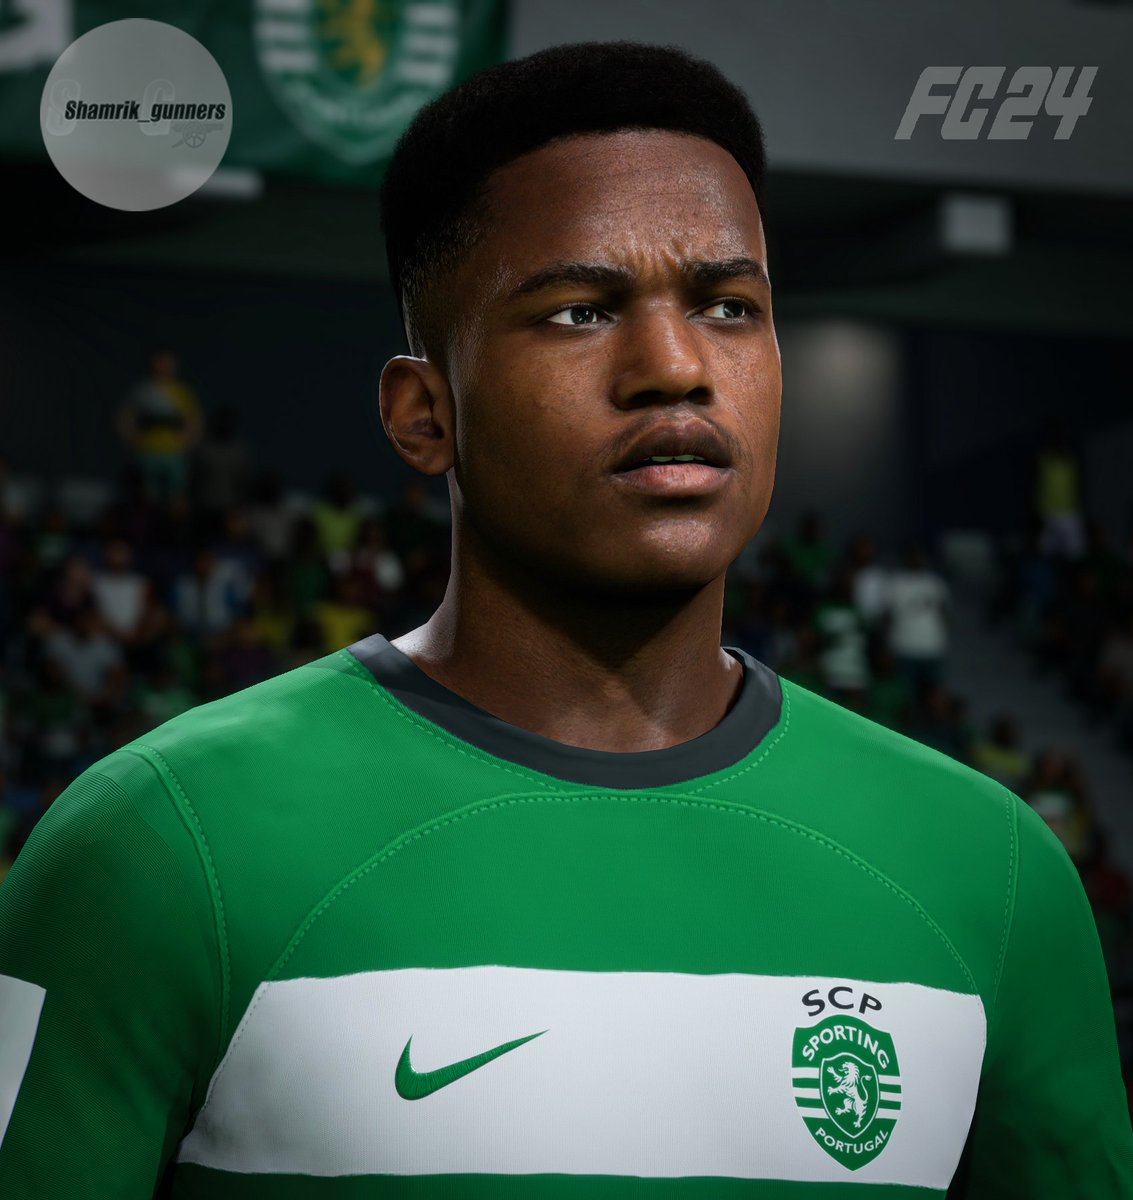 Geny Catamo - Release🔥🔥🔥
 #EAFC4 & #FIFA23
🇲🇿

🖇️Download link in bio!  Available for EA FC24 and FIFA 23!

#FC24 #EAFC24 #FUT @FIFER_Mods